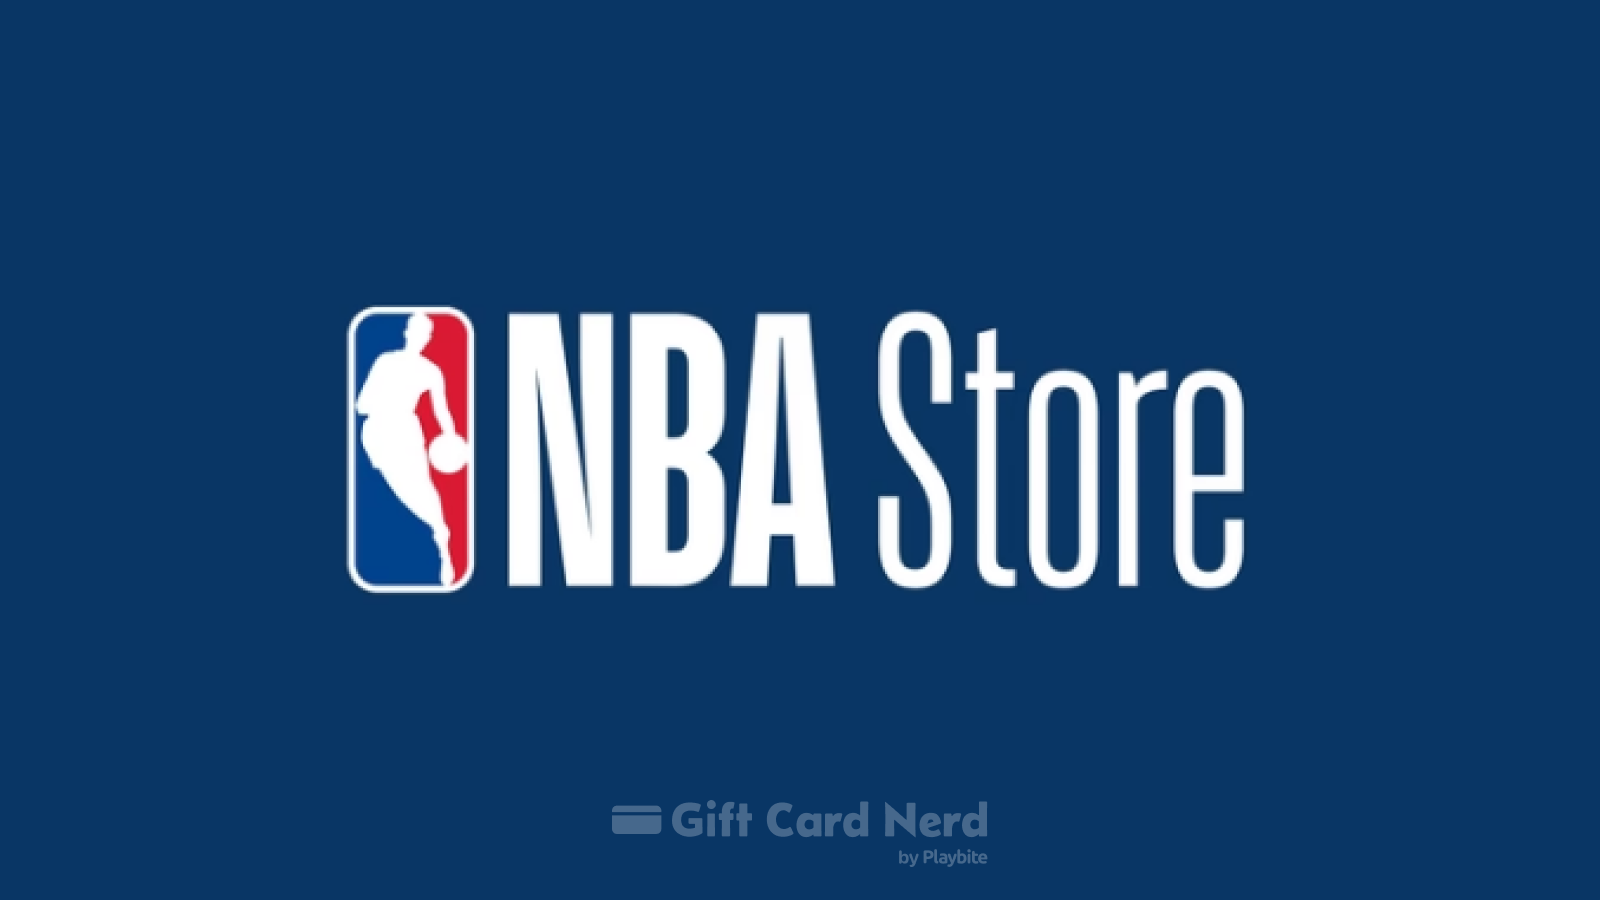 Does Amazon Sell NBA Store Gift Cards?